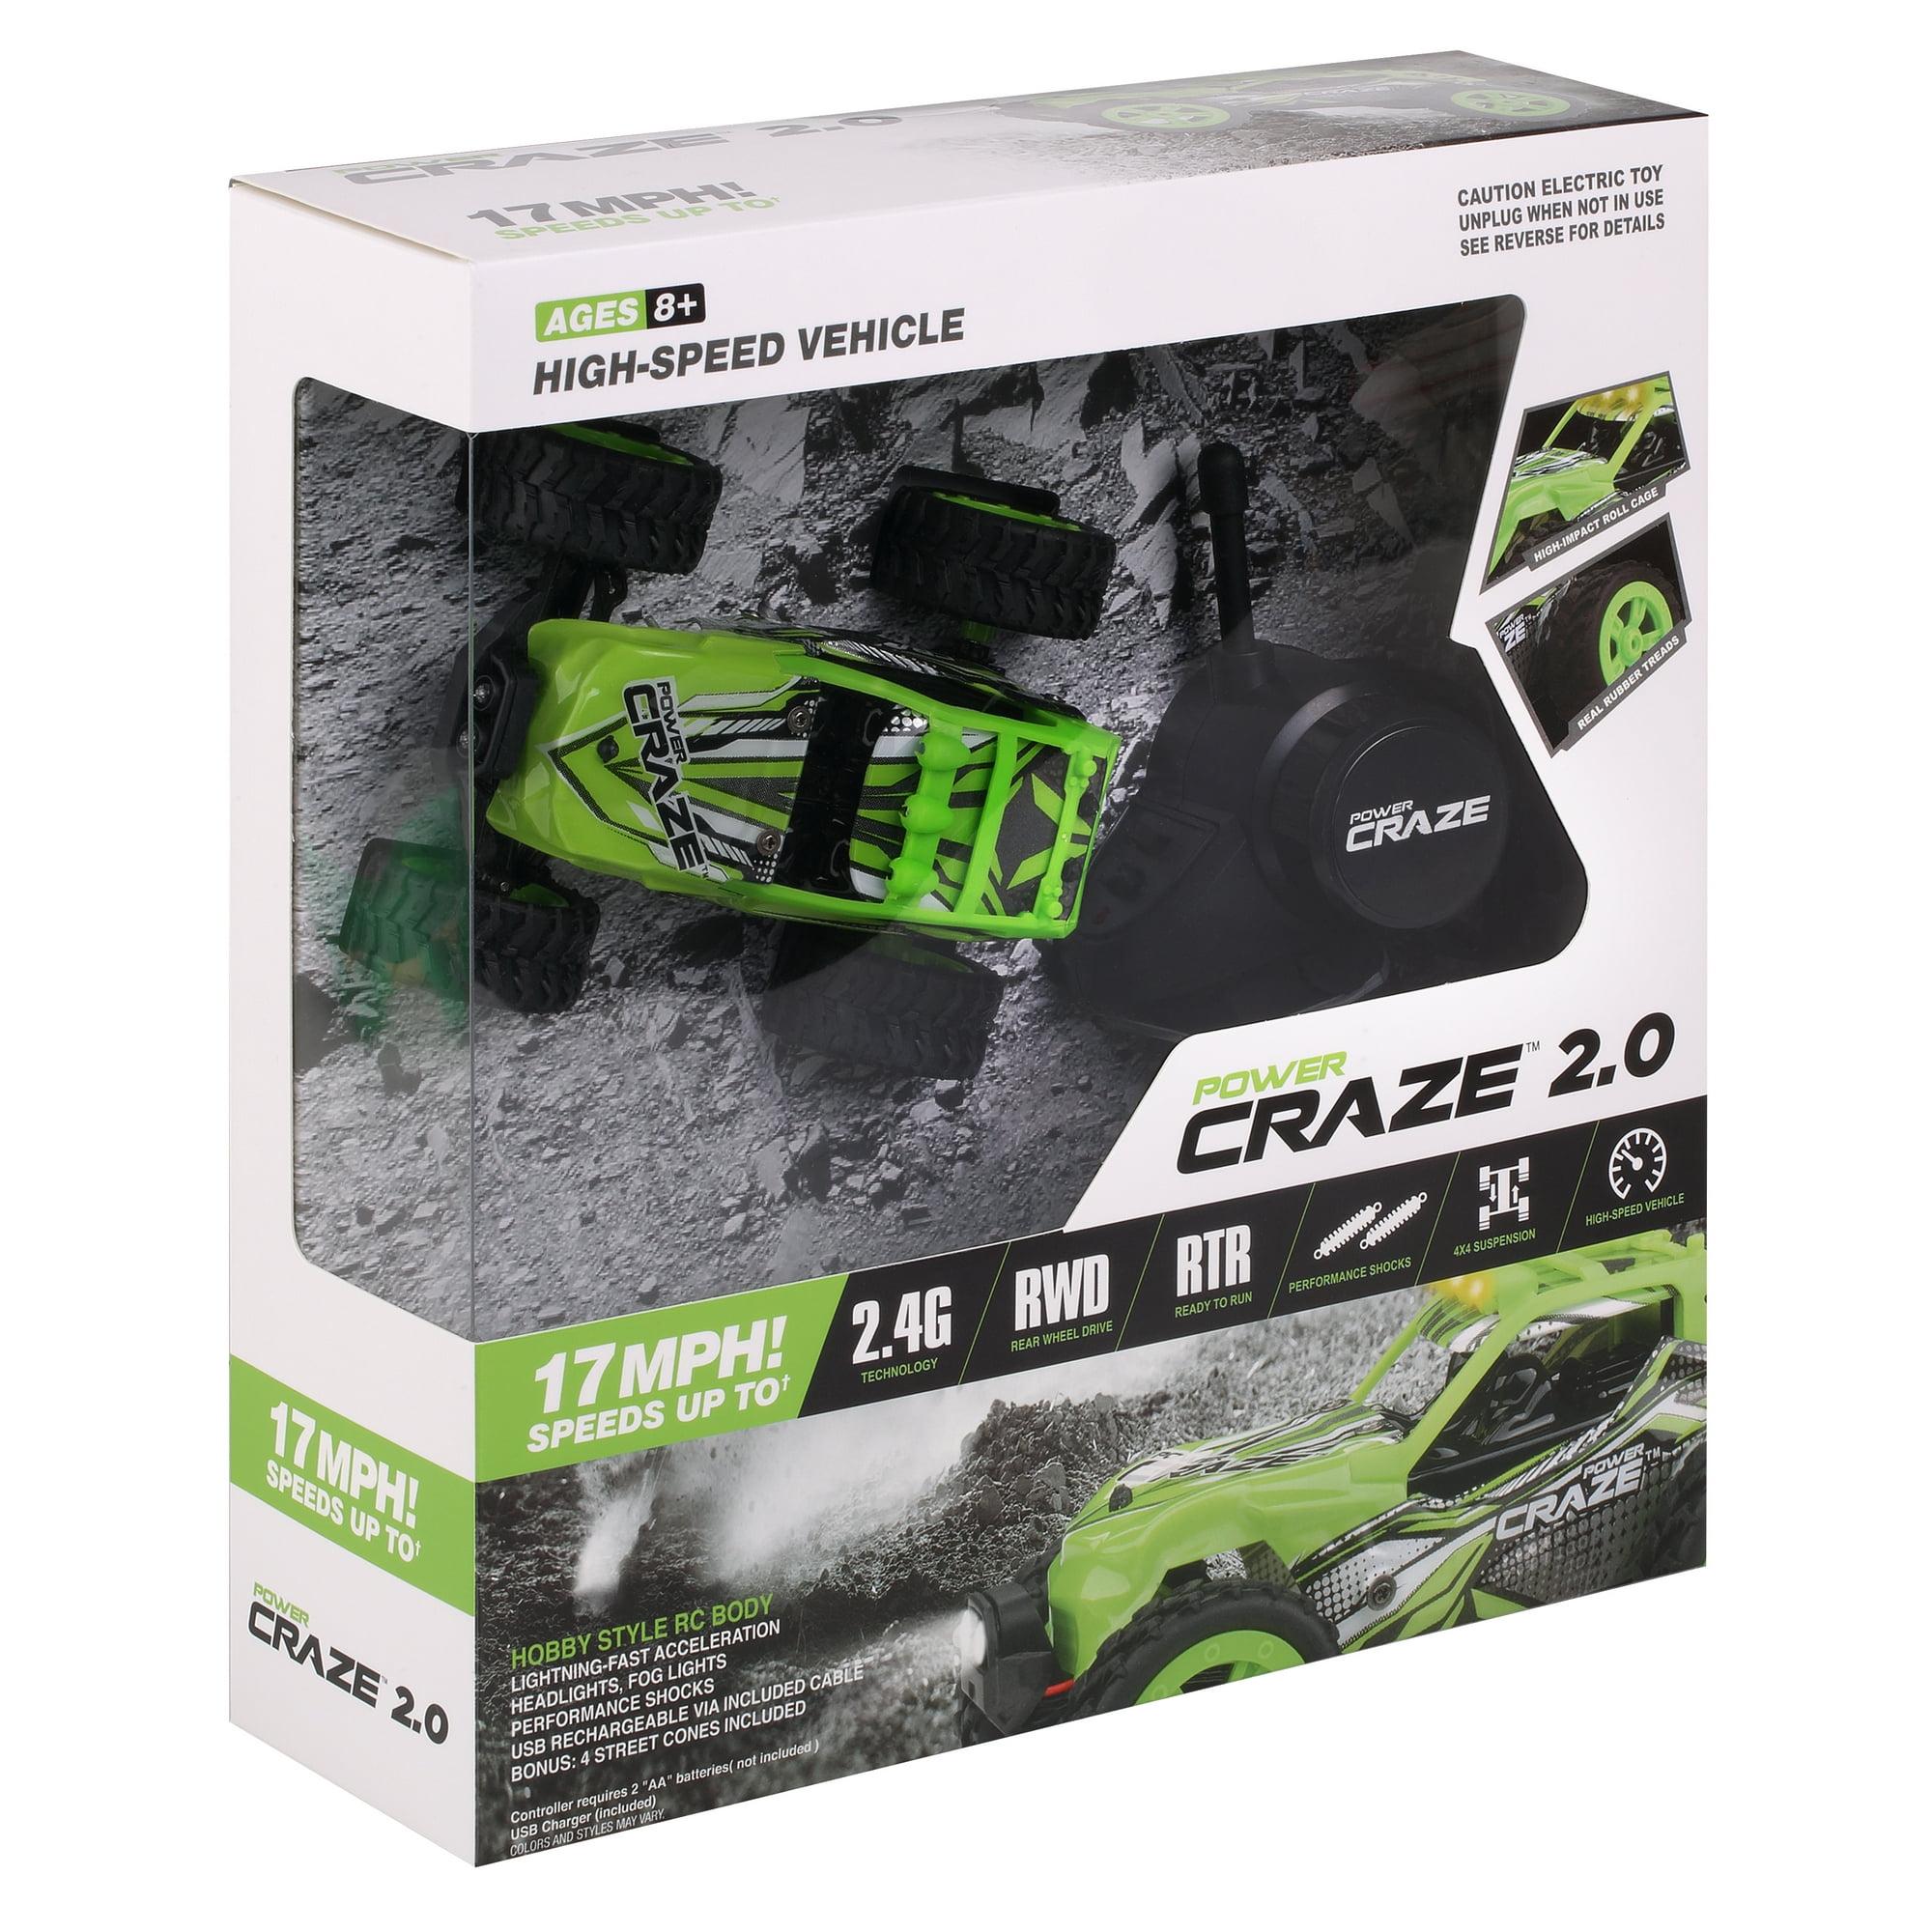 Power Craze Rc: Unbeatable Speed, Durability, and Ease of Use!